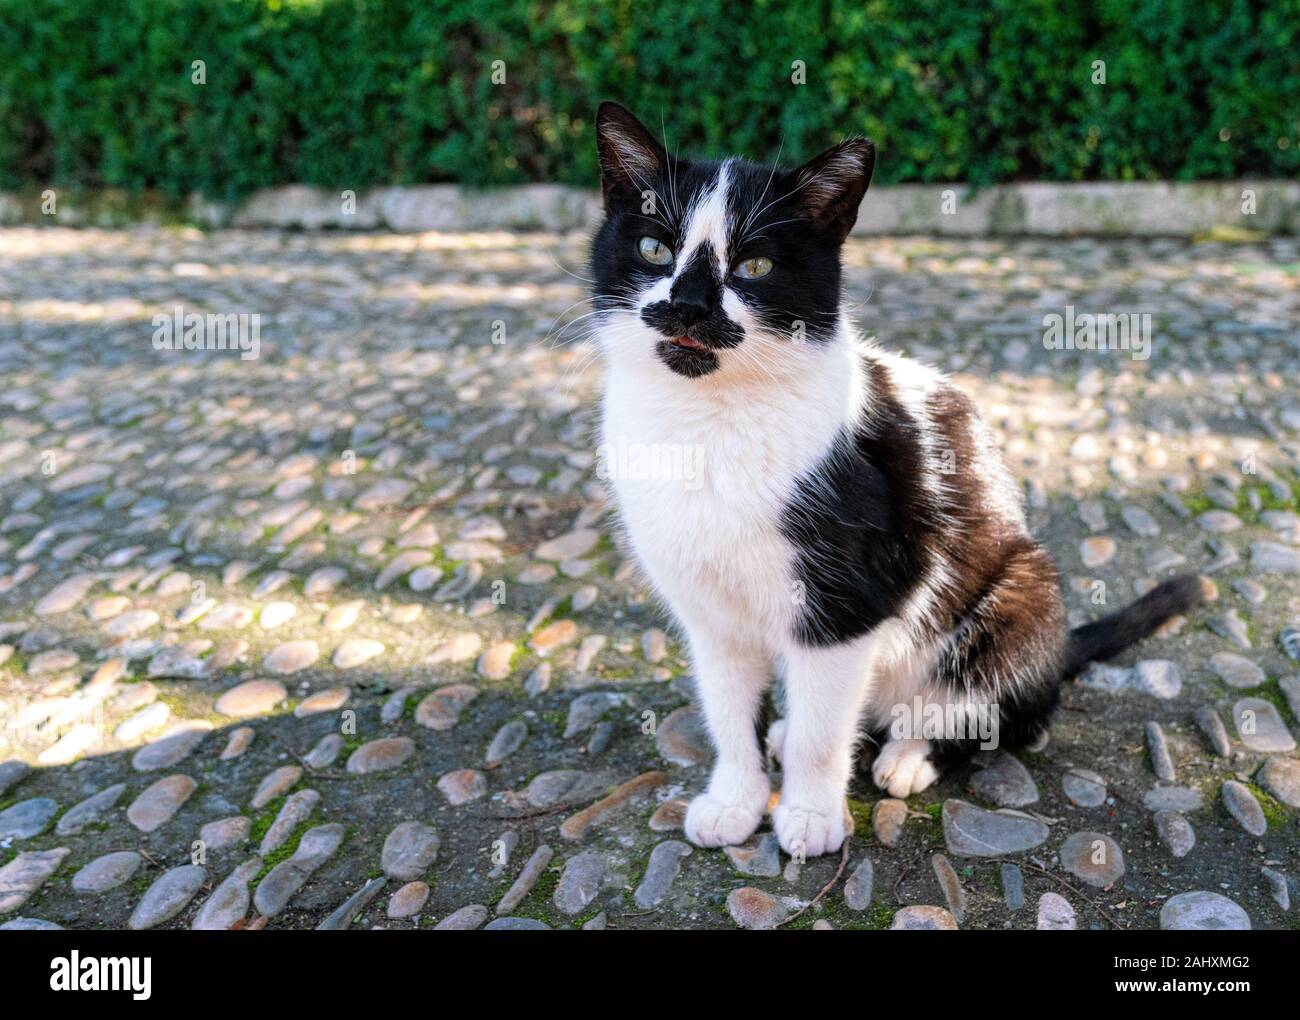 A bicolor cat with white fur combined of some black color. Unique facial markings. Stock Photo